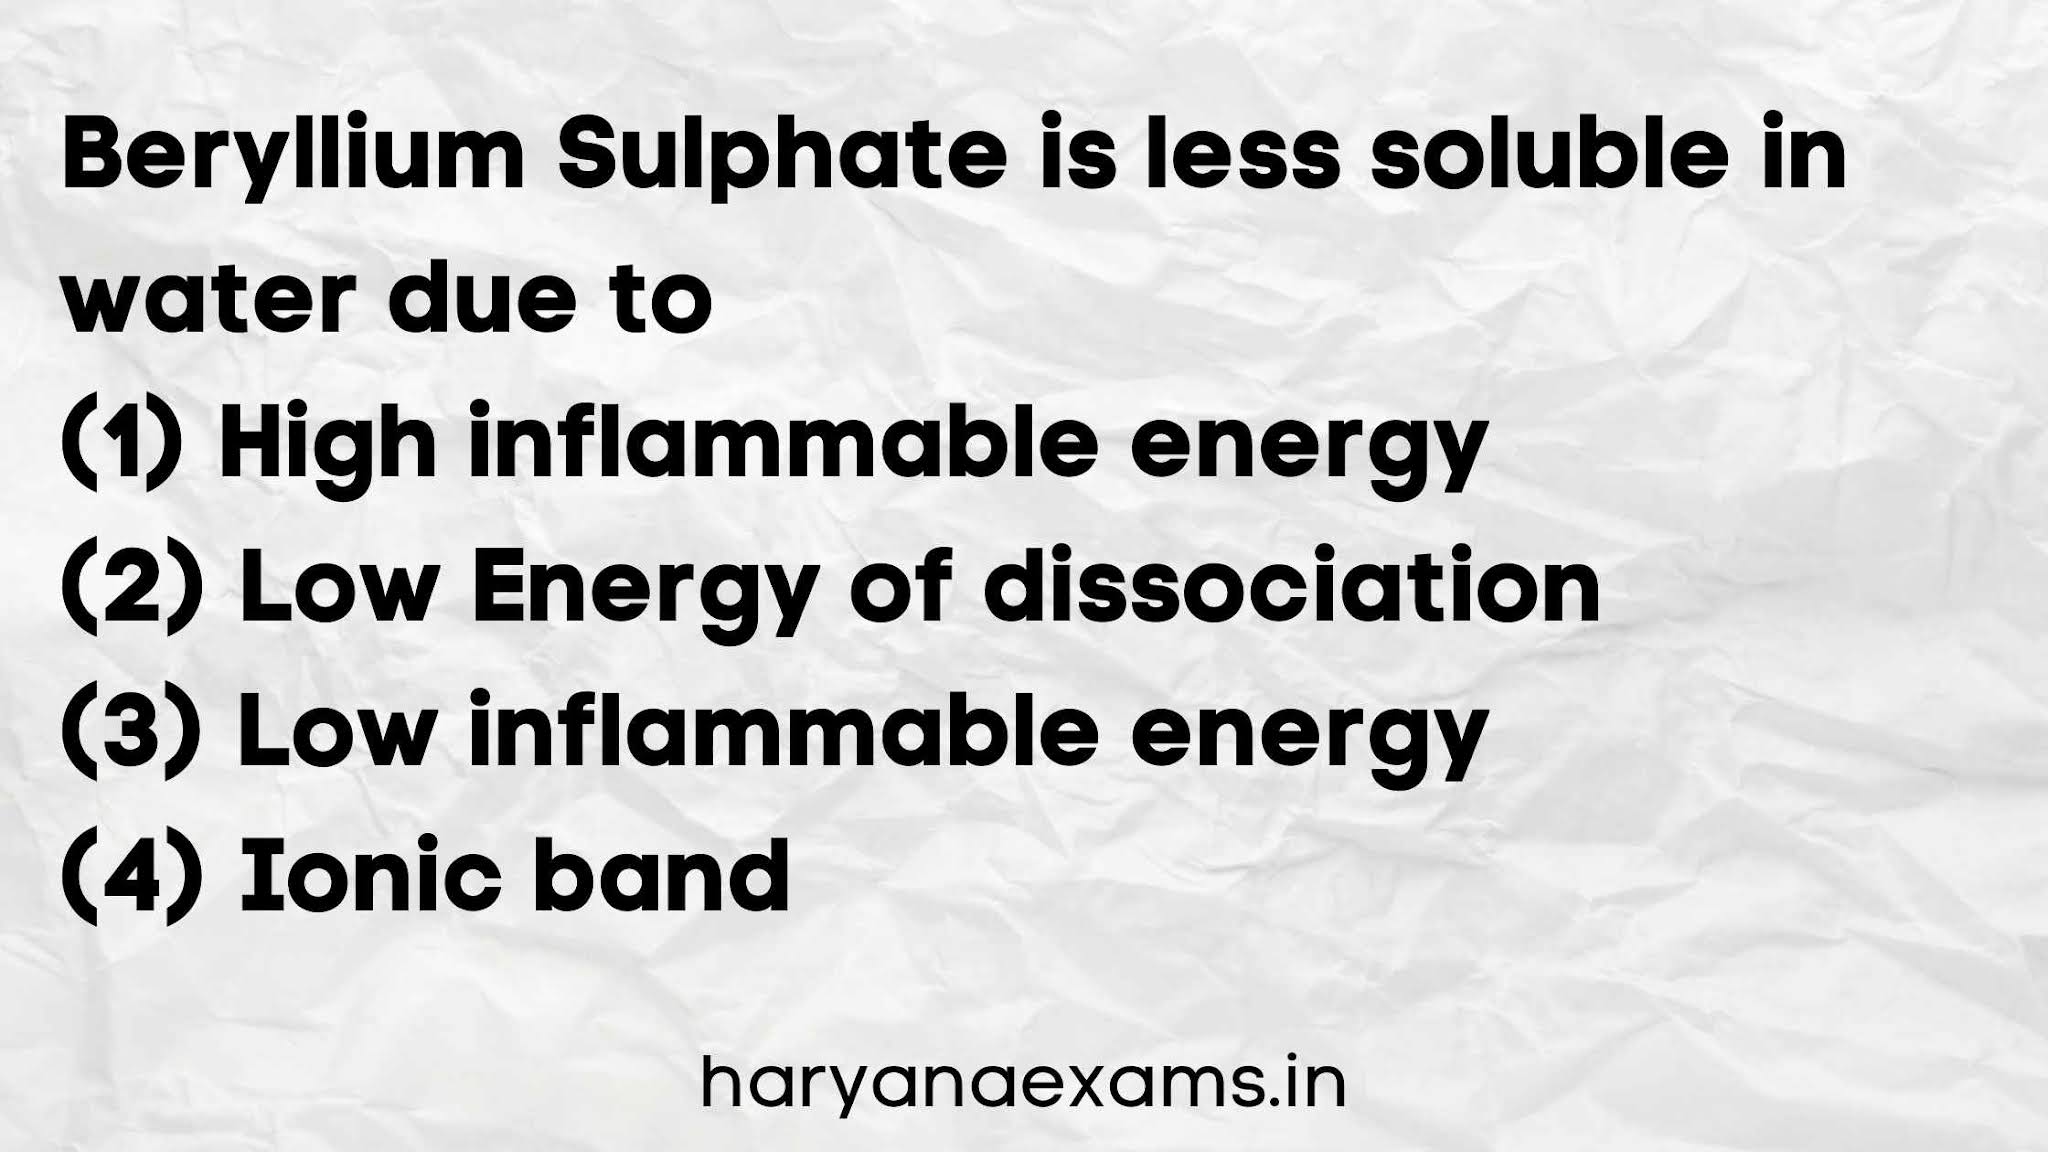 Beryllium Sulphate is less soluble in water due to   (1) High inflammable energy   (2) Low Energy of dissociation   (3) Low inflammable energy   (4) Ionic band